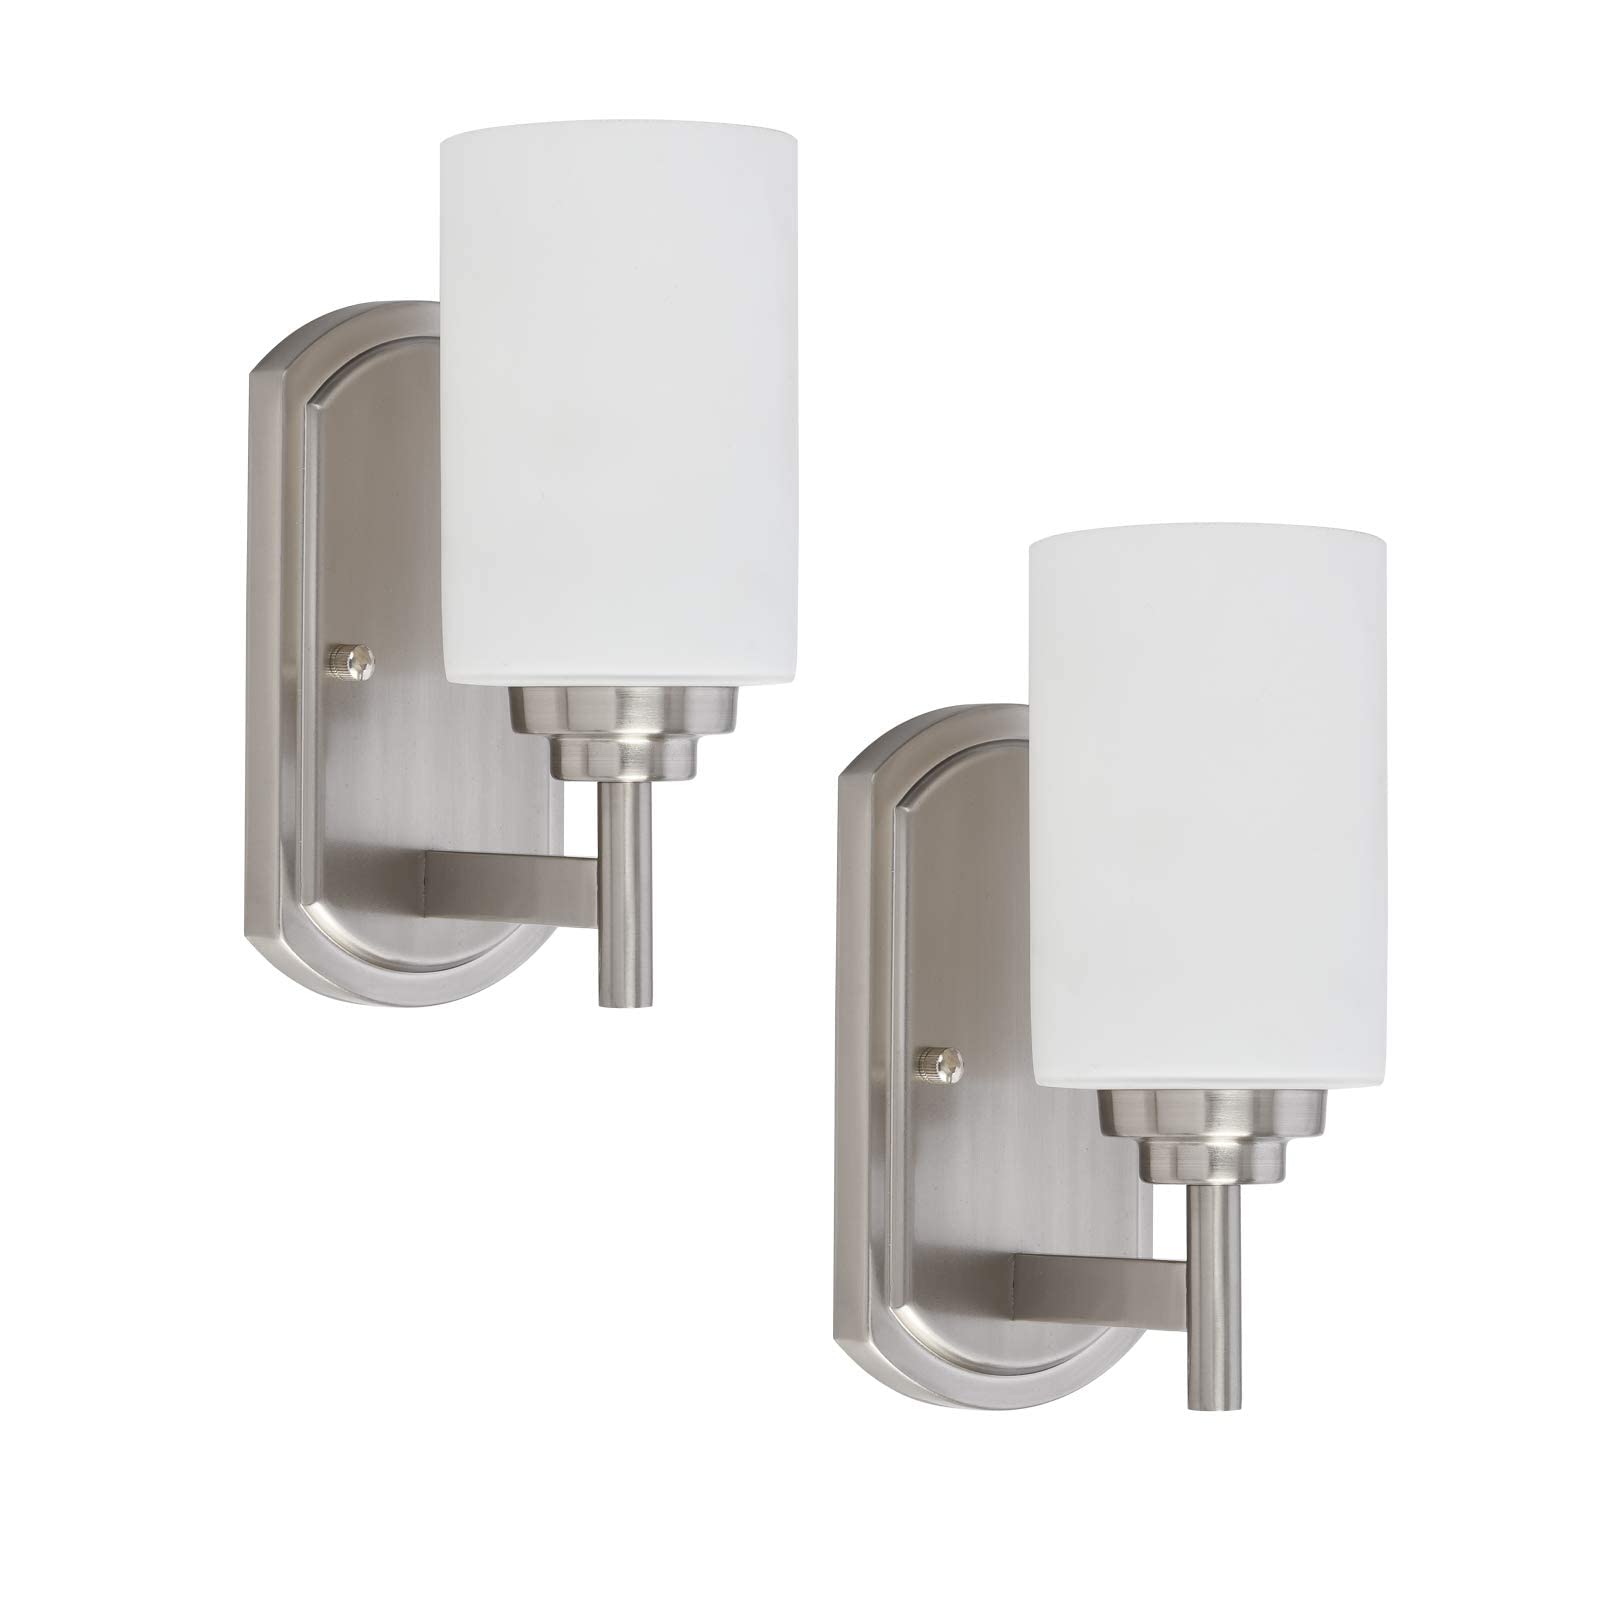 Galtlap Modern Wall Sconces Set of 2, Bathroom Vanity Lights with White Frosted Glass, Wall Lighting Fixtures Satin Nickel for Entryway Over Mirror Living Room Bedroom